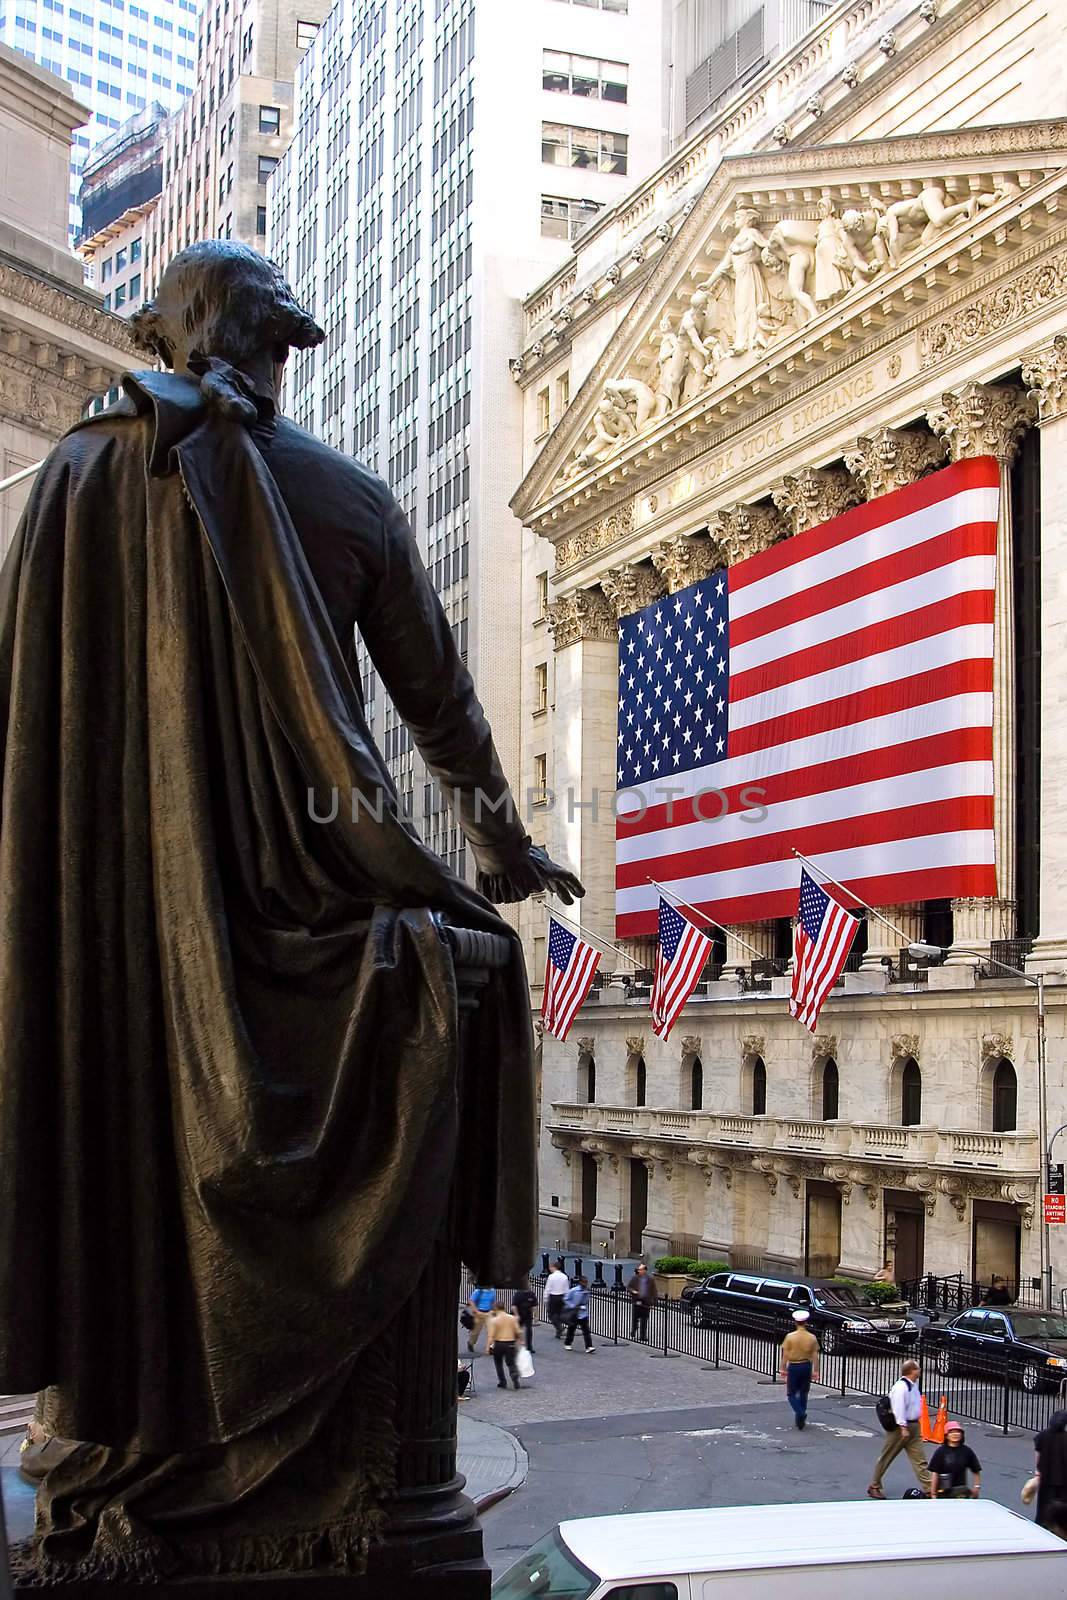 A statue of former President George Washington pointing towards the American Flag hanging on the New York Stock Exchange building on Wall Street